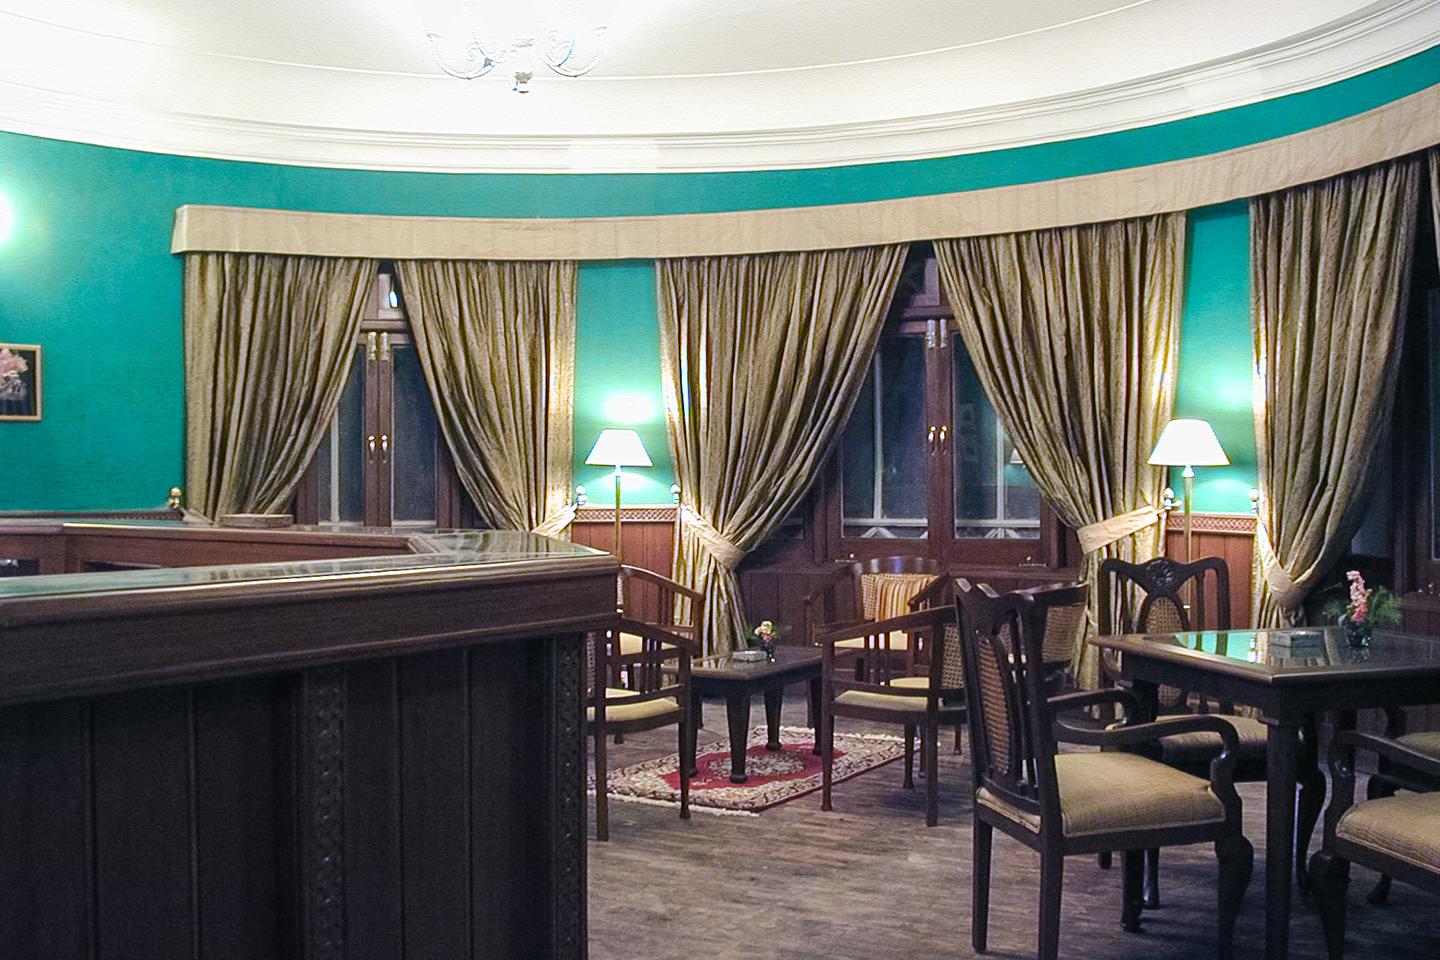 The bar has wood panelling and deep green walls.